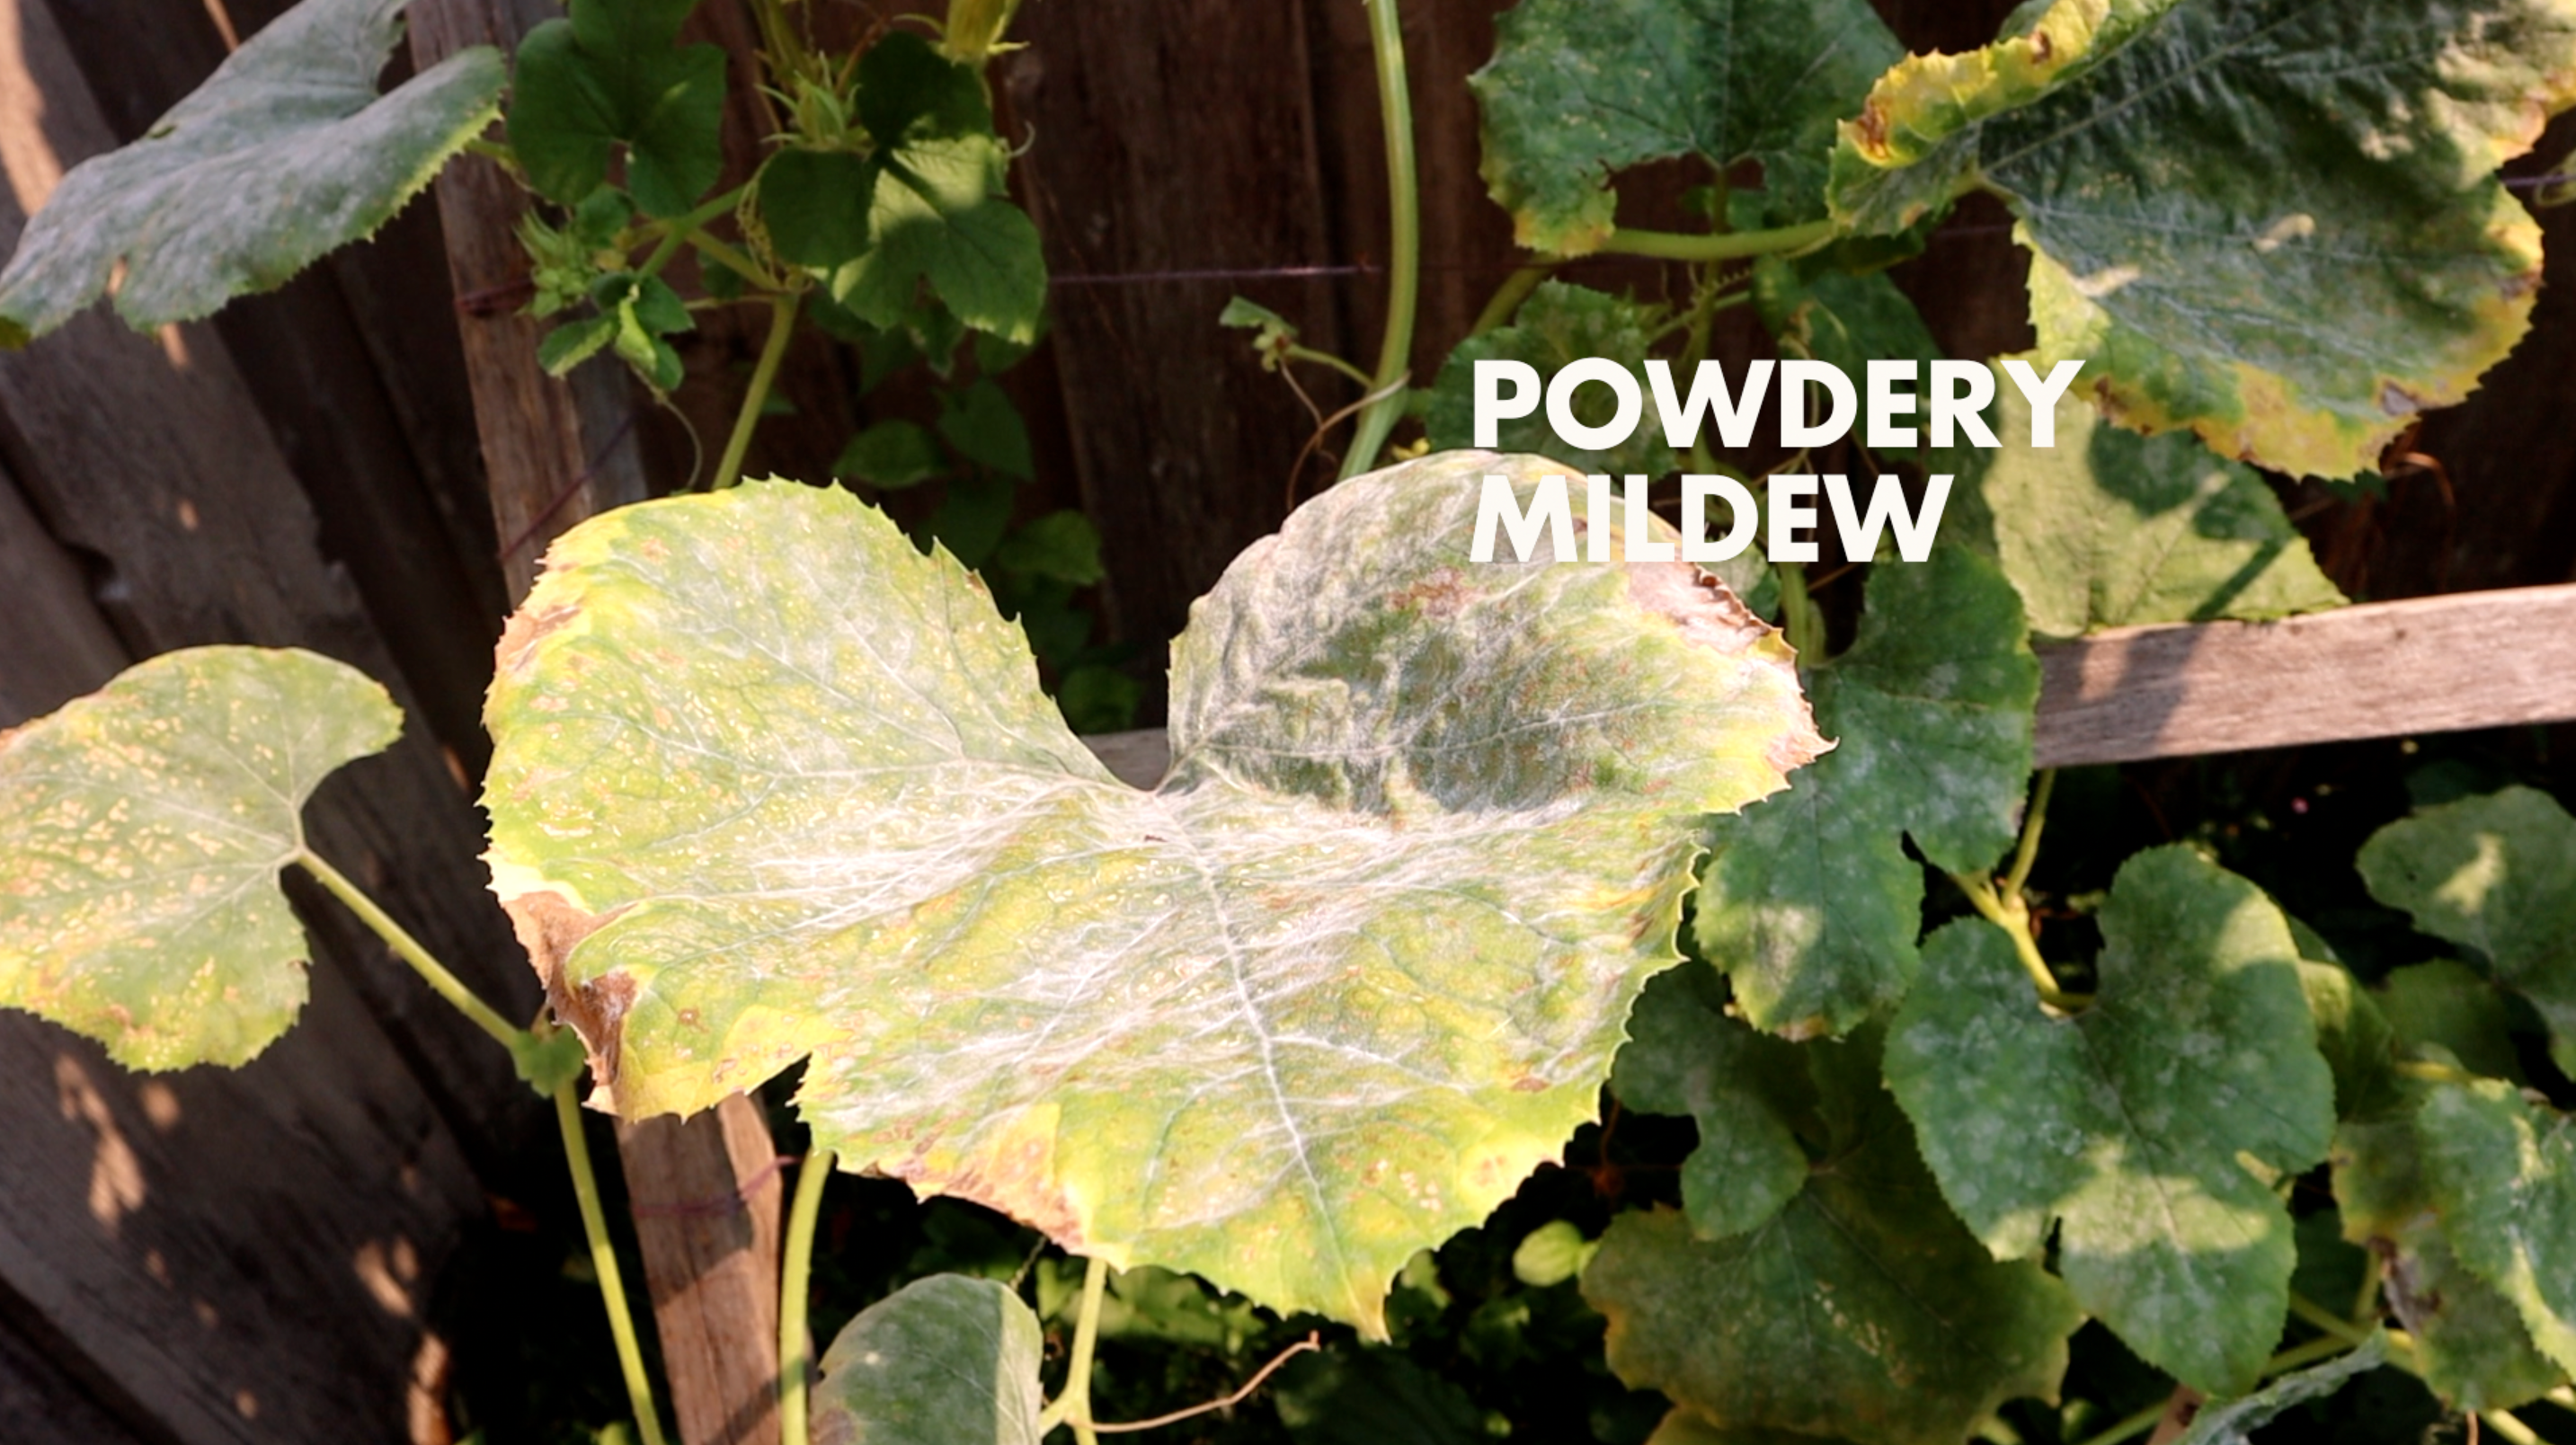 Powdery Mildew in the garden due to poor spacing and air flow